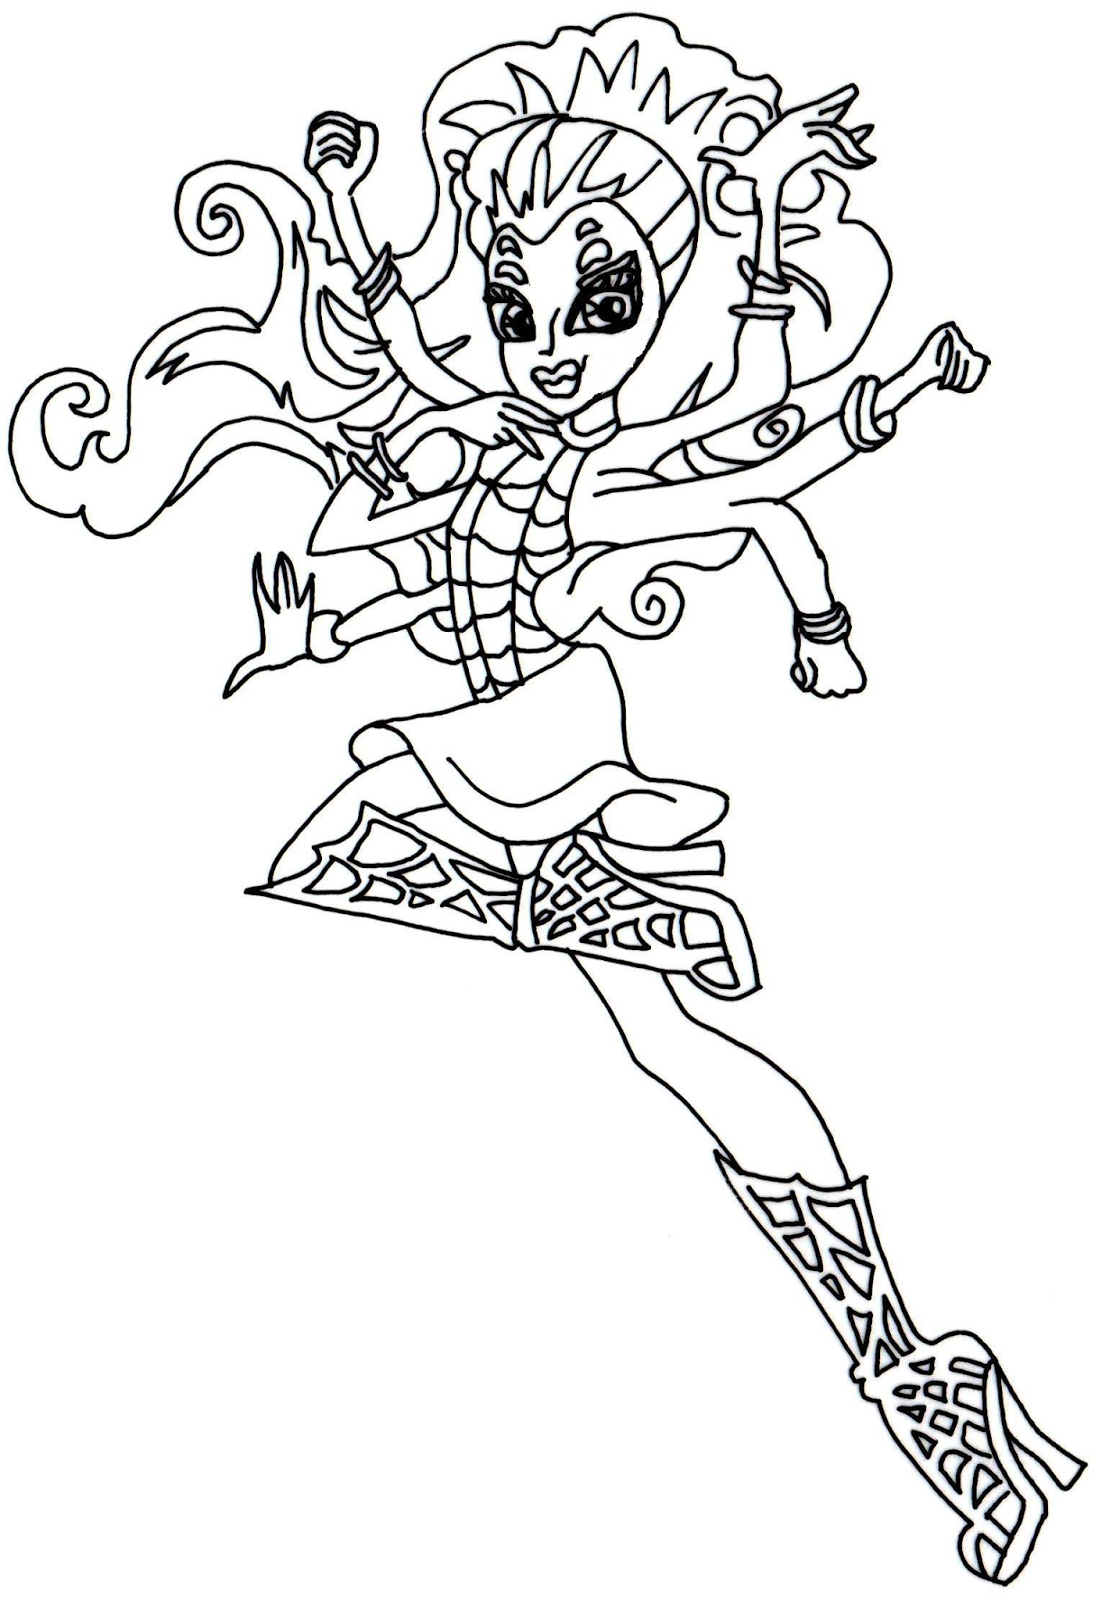 new monster high dolls 2014 coloring pages: Webarella Monster High